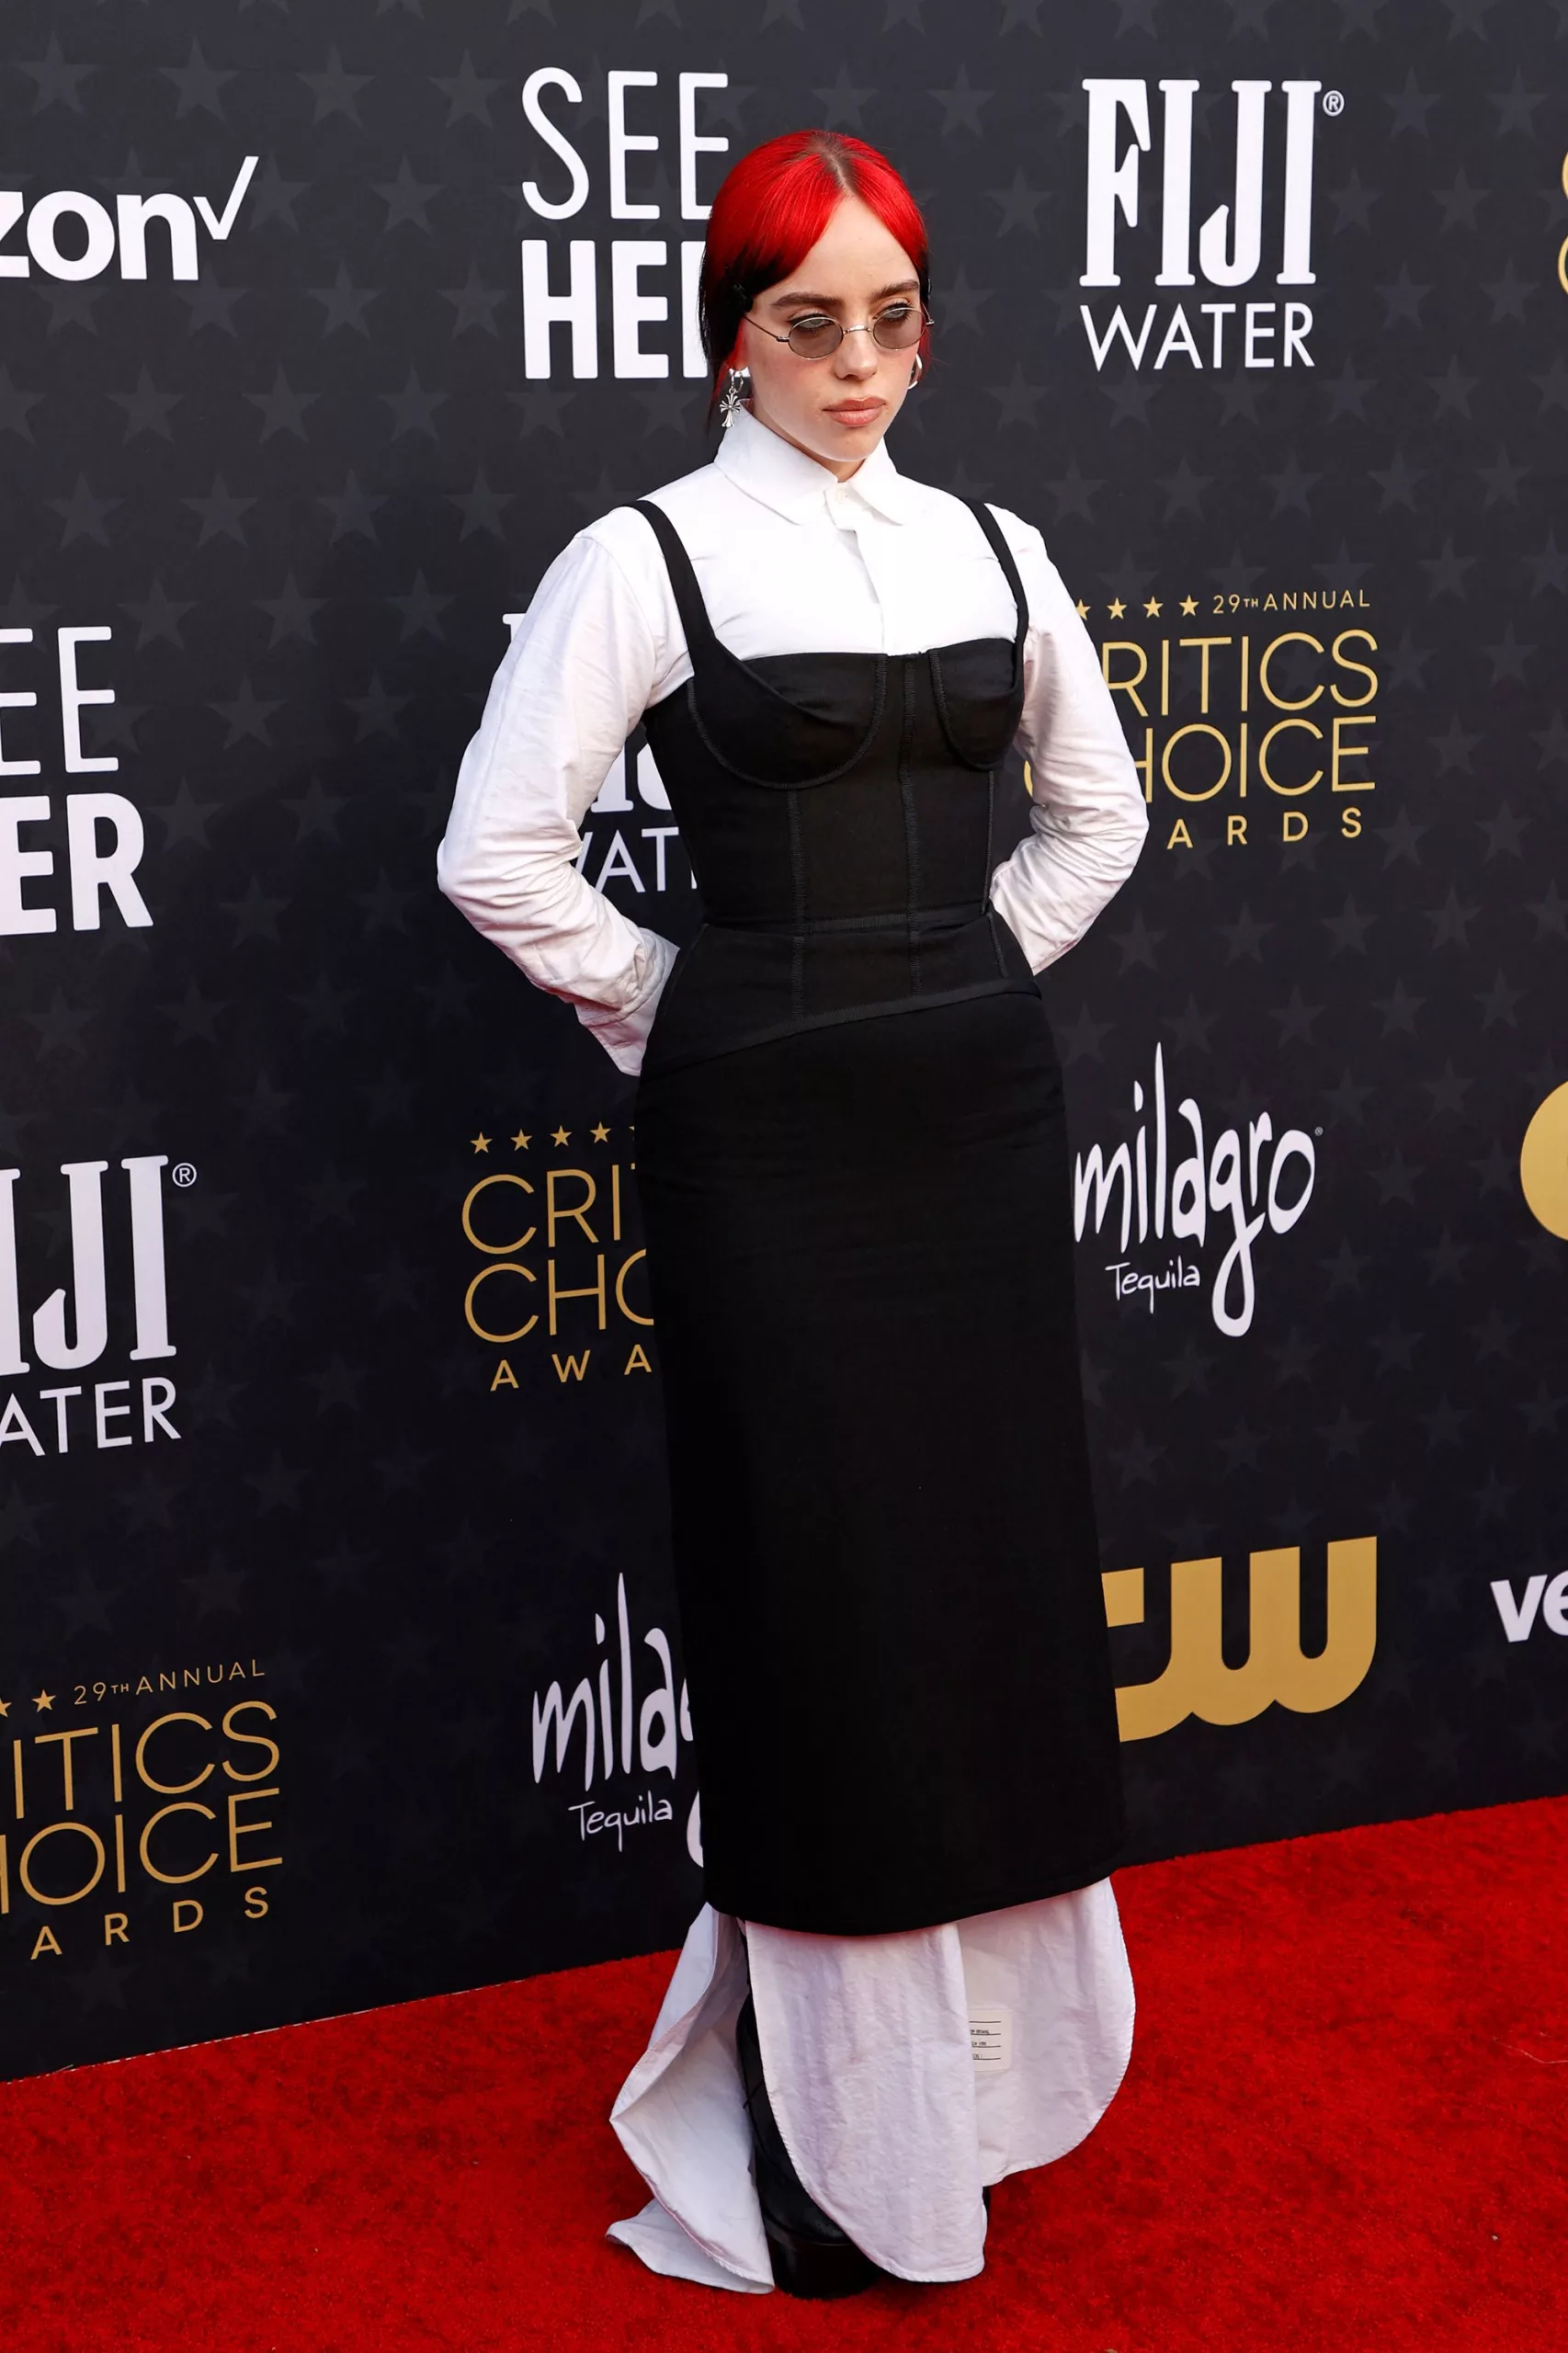 Billie Eilish wore a Thom Browne look comprising a white floor-length shirtdress beneath a little black dress with structured bodice.